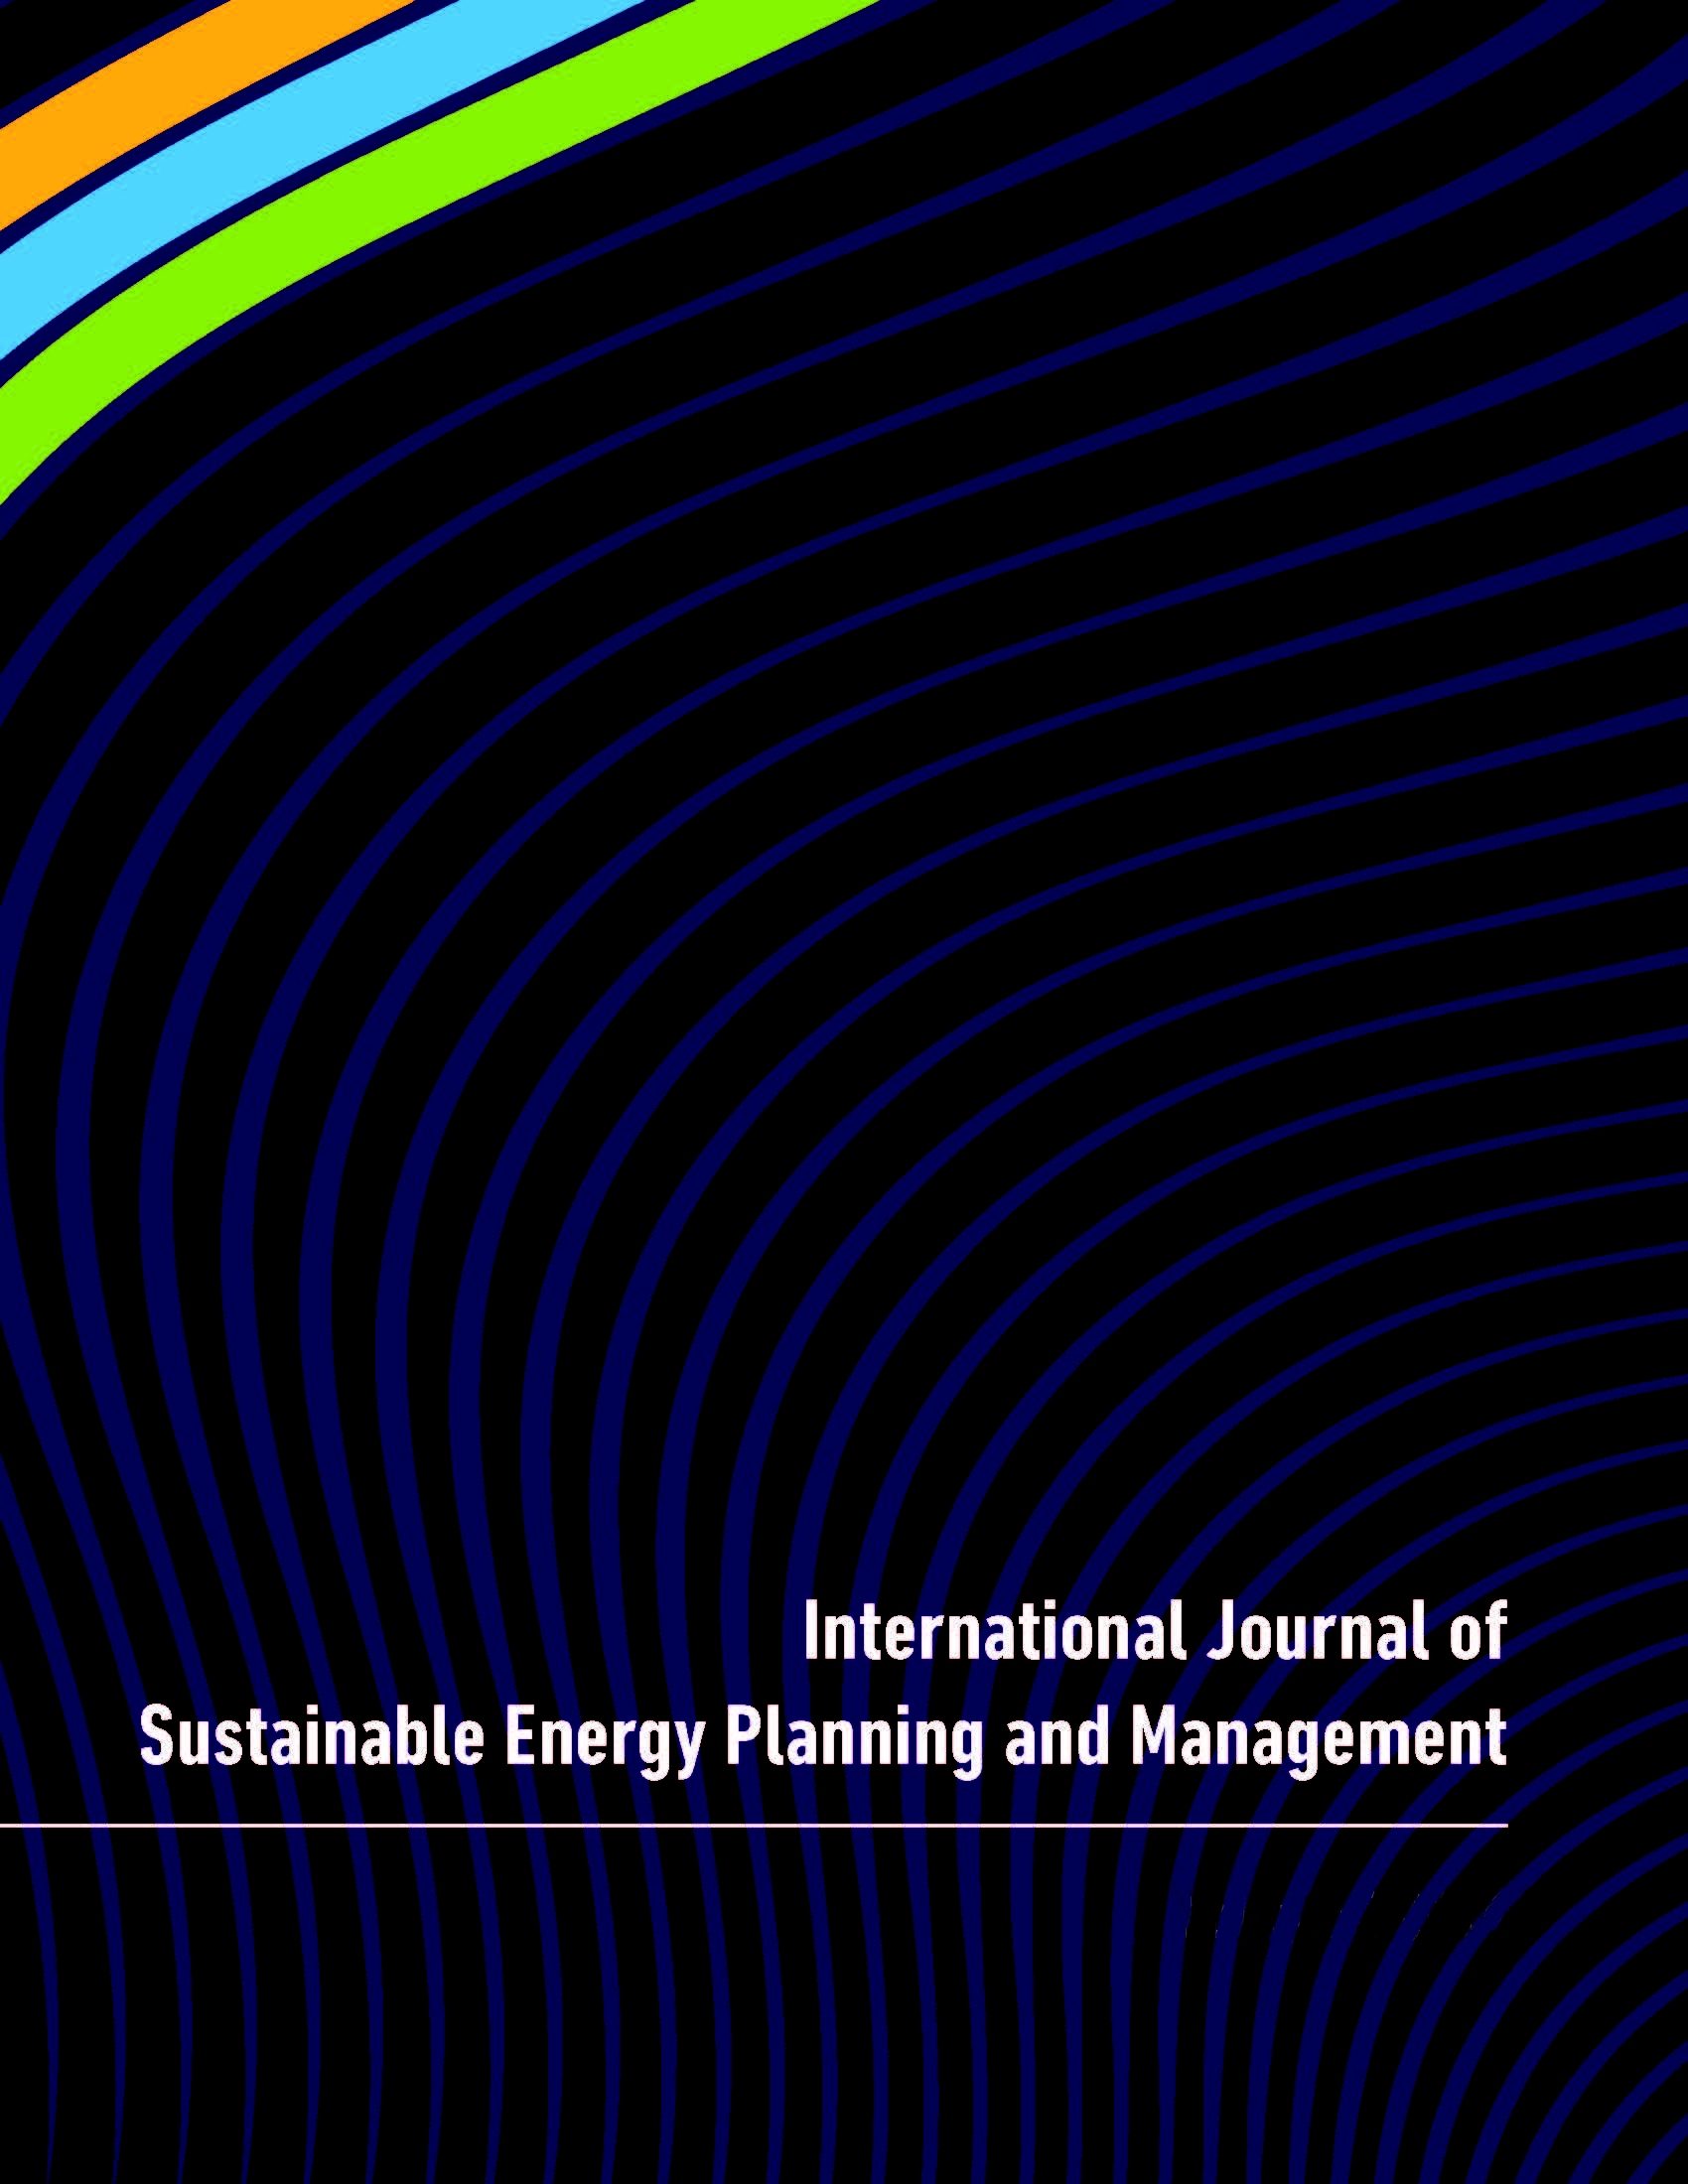 Modelling framework integration large-scale heat pumps in district heating using low-temperature sources International Journal of Sustainable Energy Planning and Management